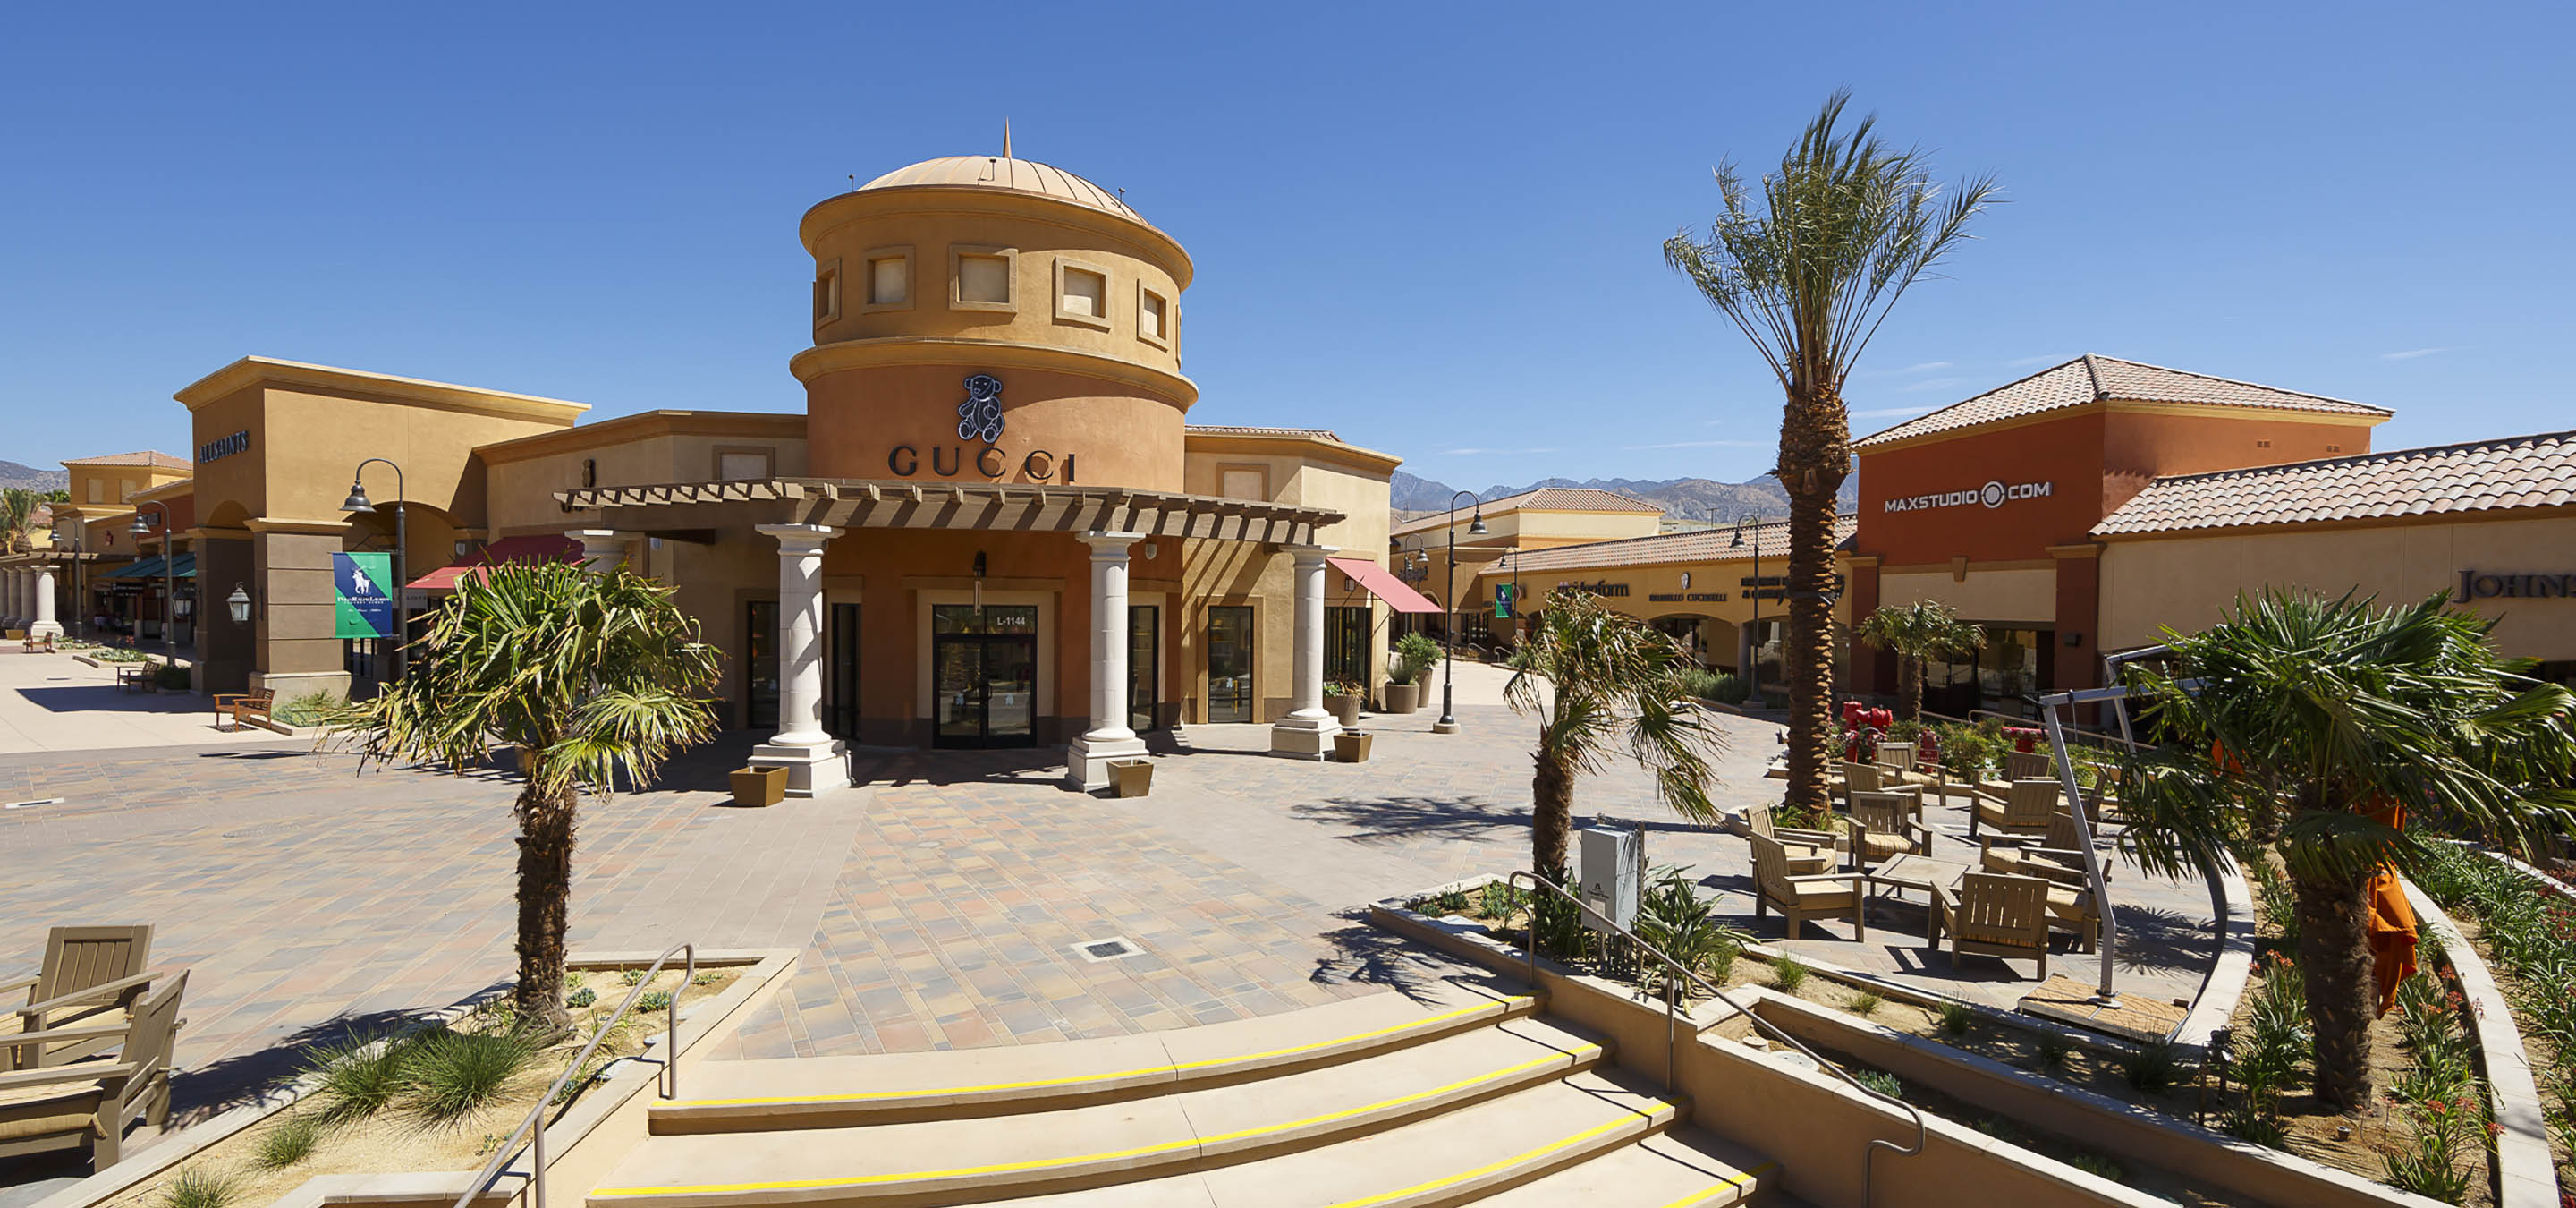 Map of the mall - Picture of Desert Hills Premium Outlets, Cabazon